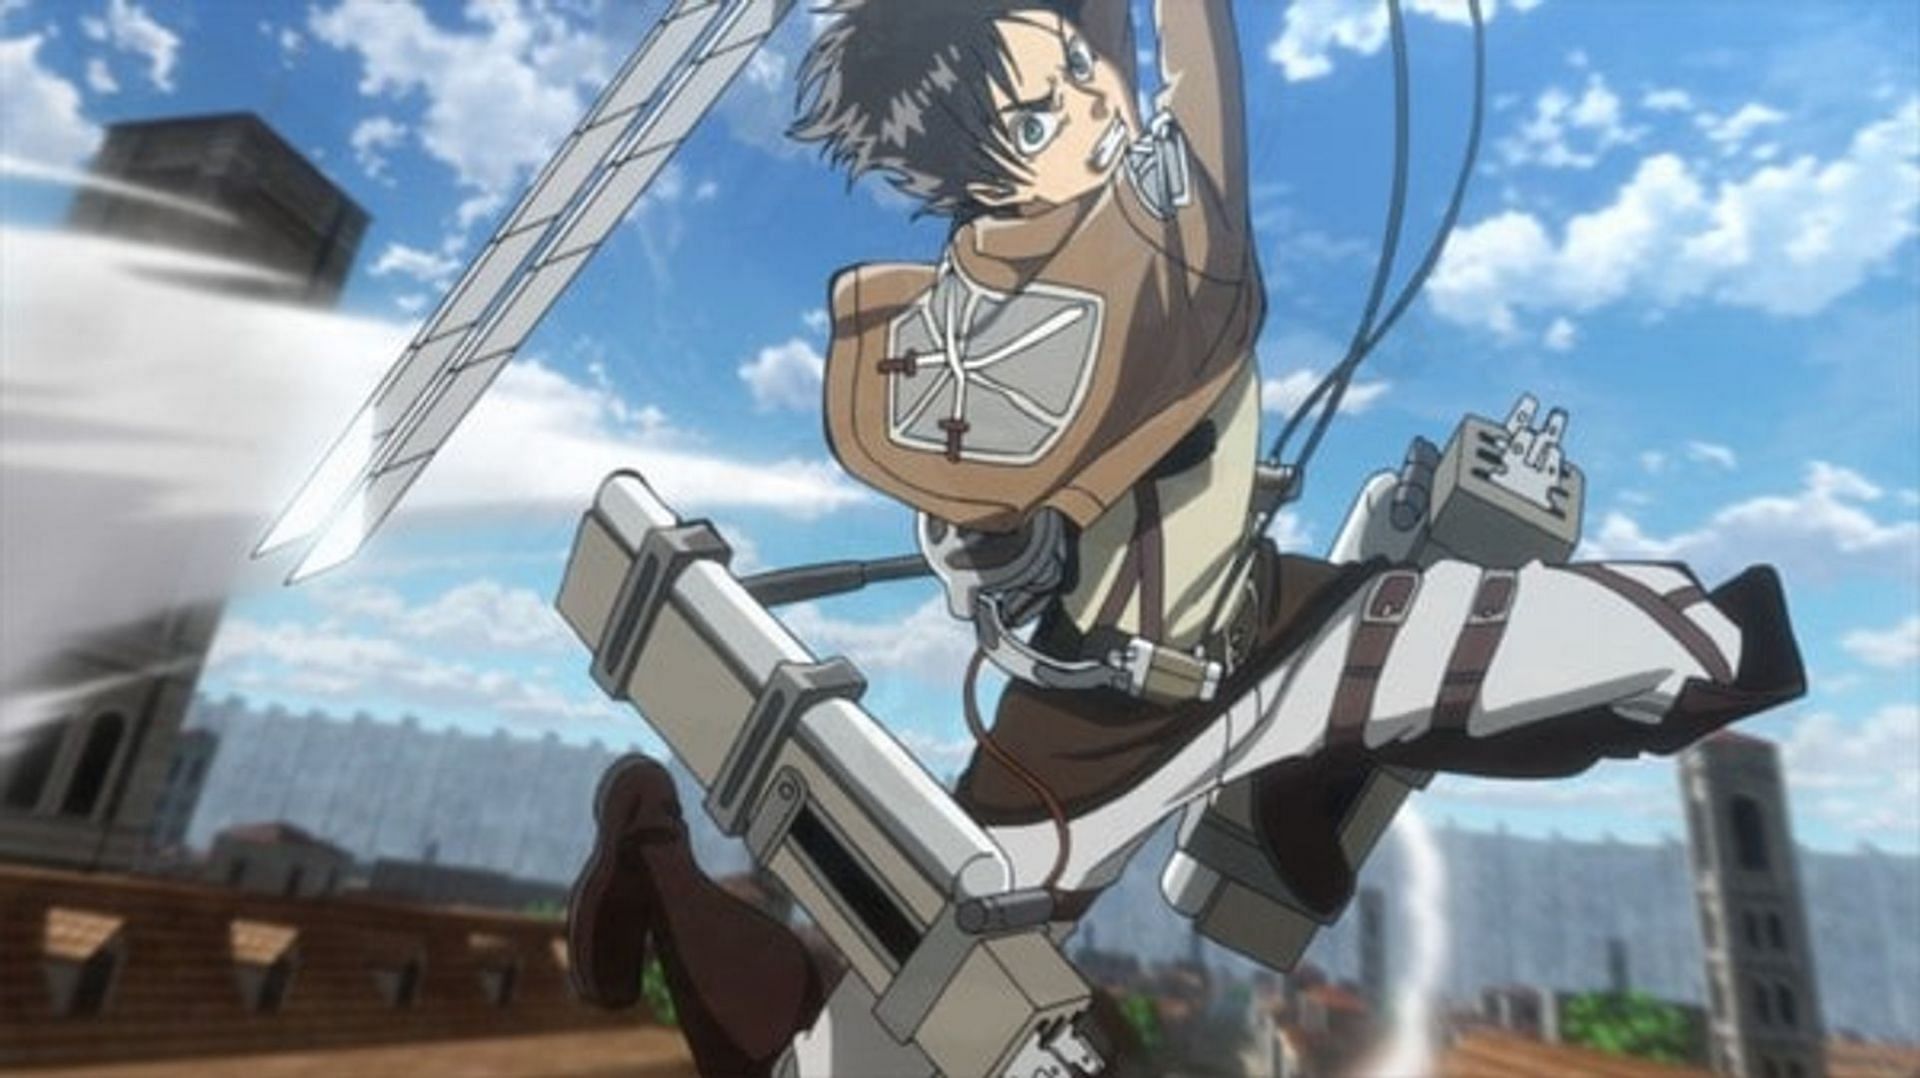 ODM gear lets users zip around in &#039;Attack on Titan&#039; (Image via Funimation)